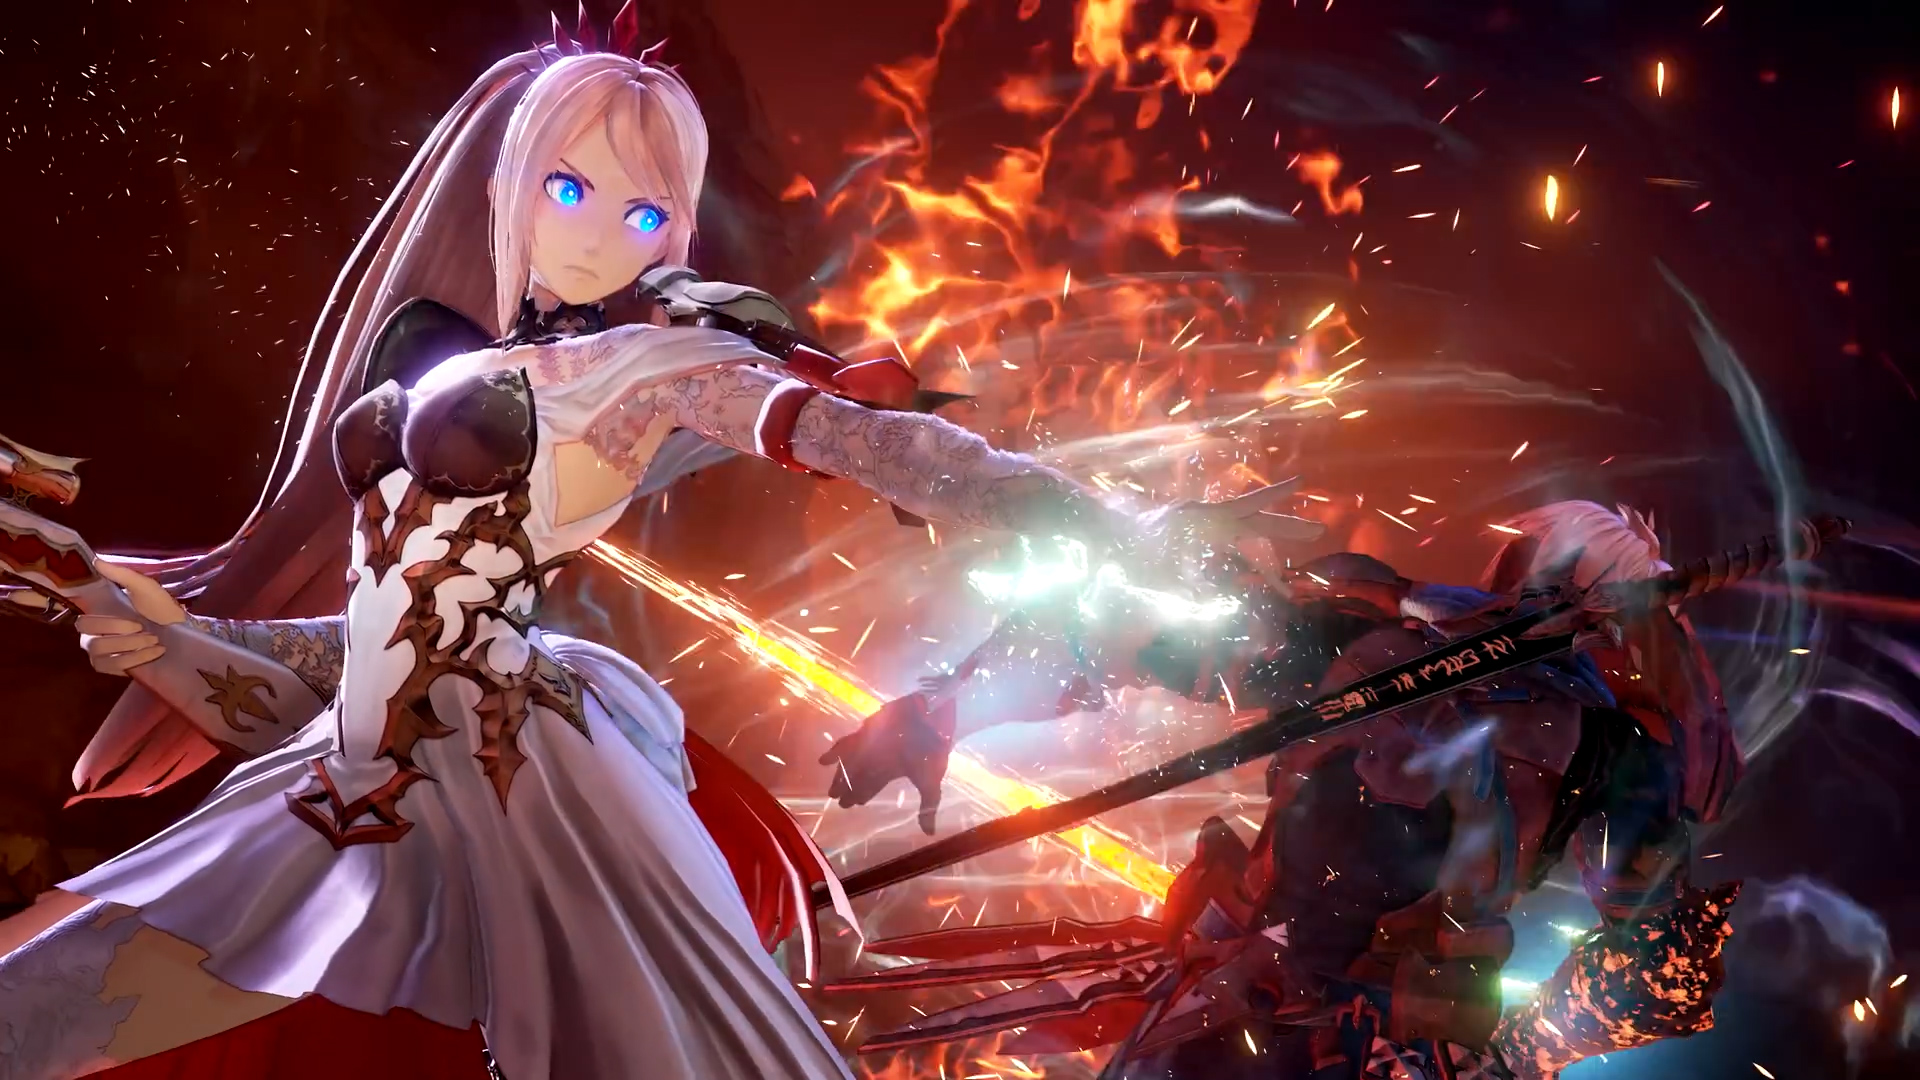 tales of arise earth seed